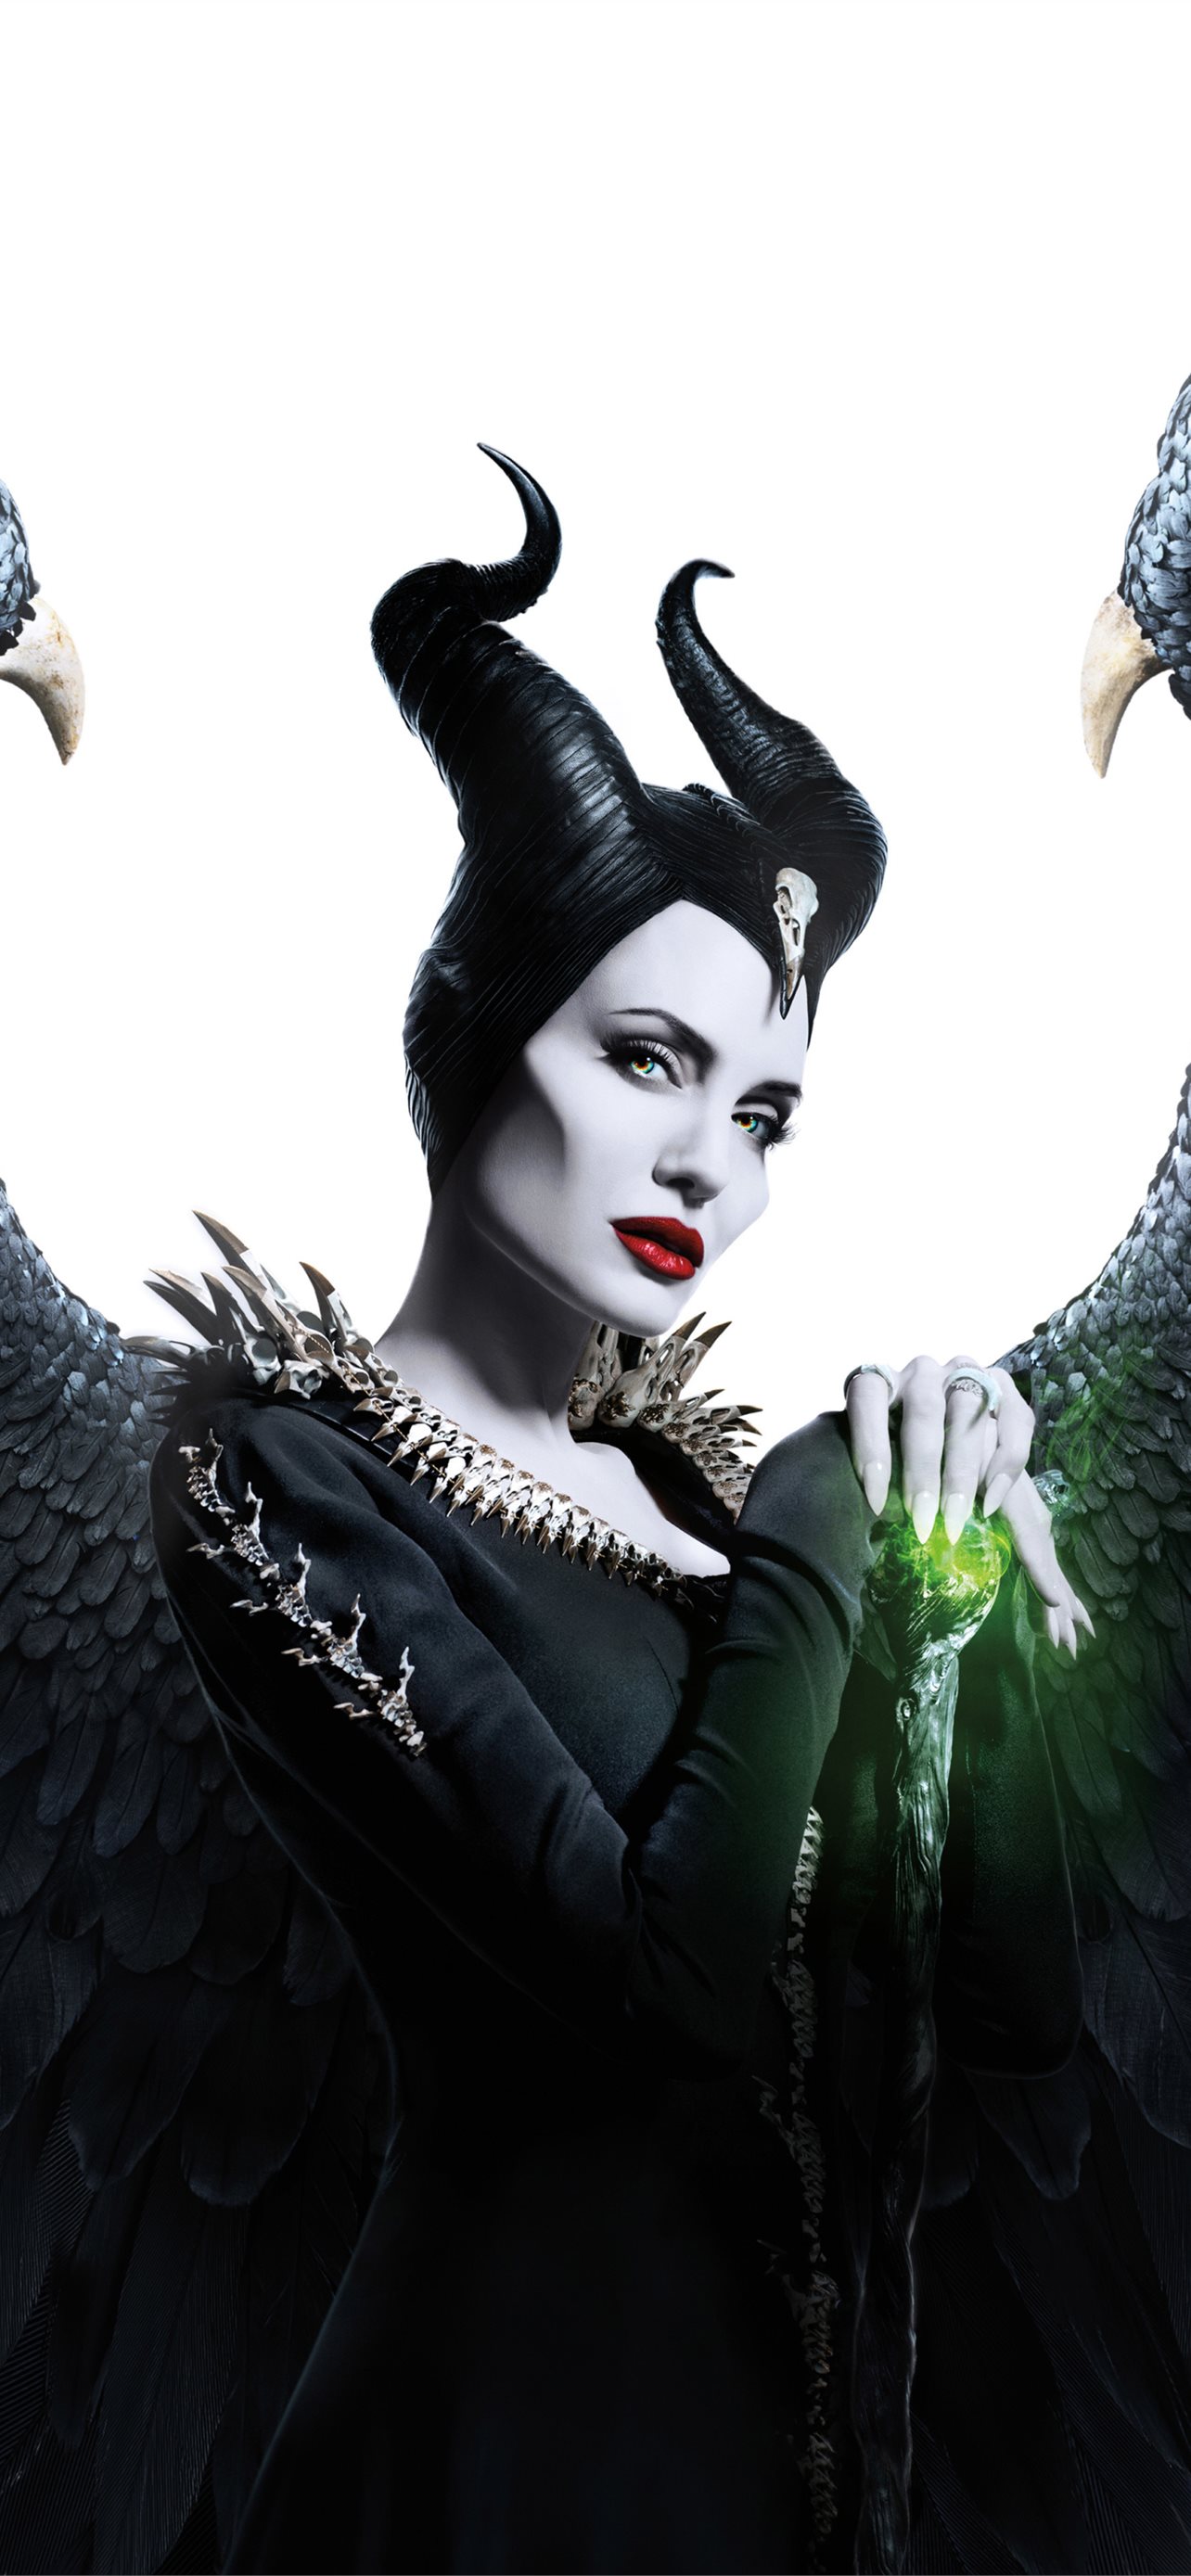 Maleficent 2 Poster Wallpapers